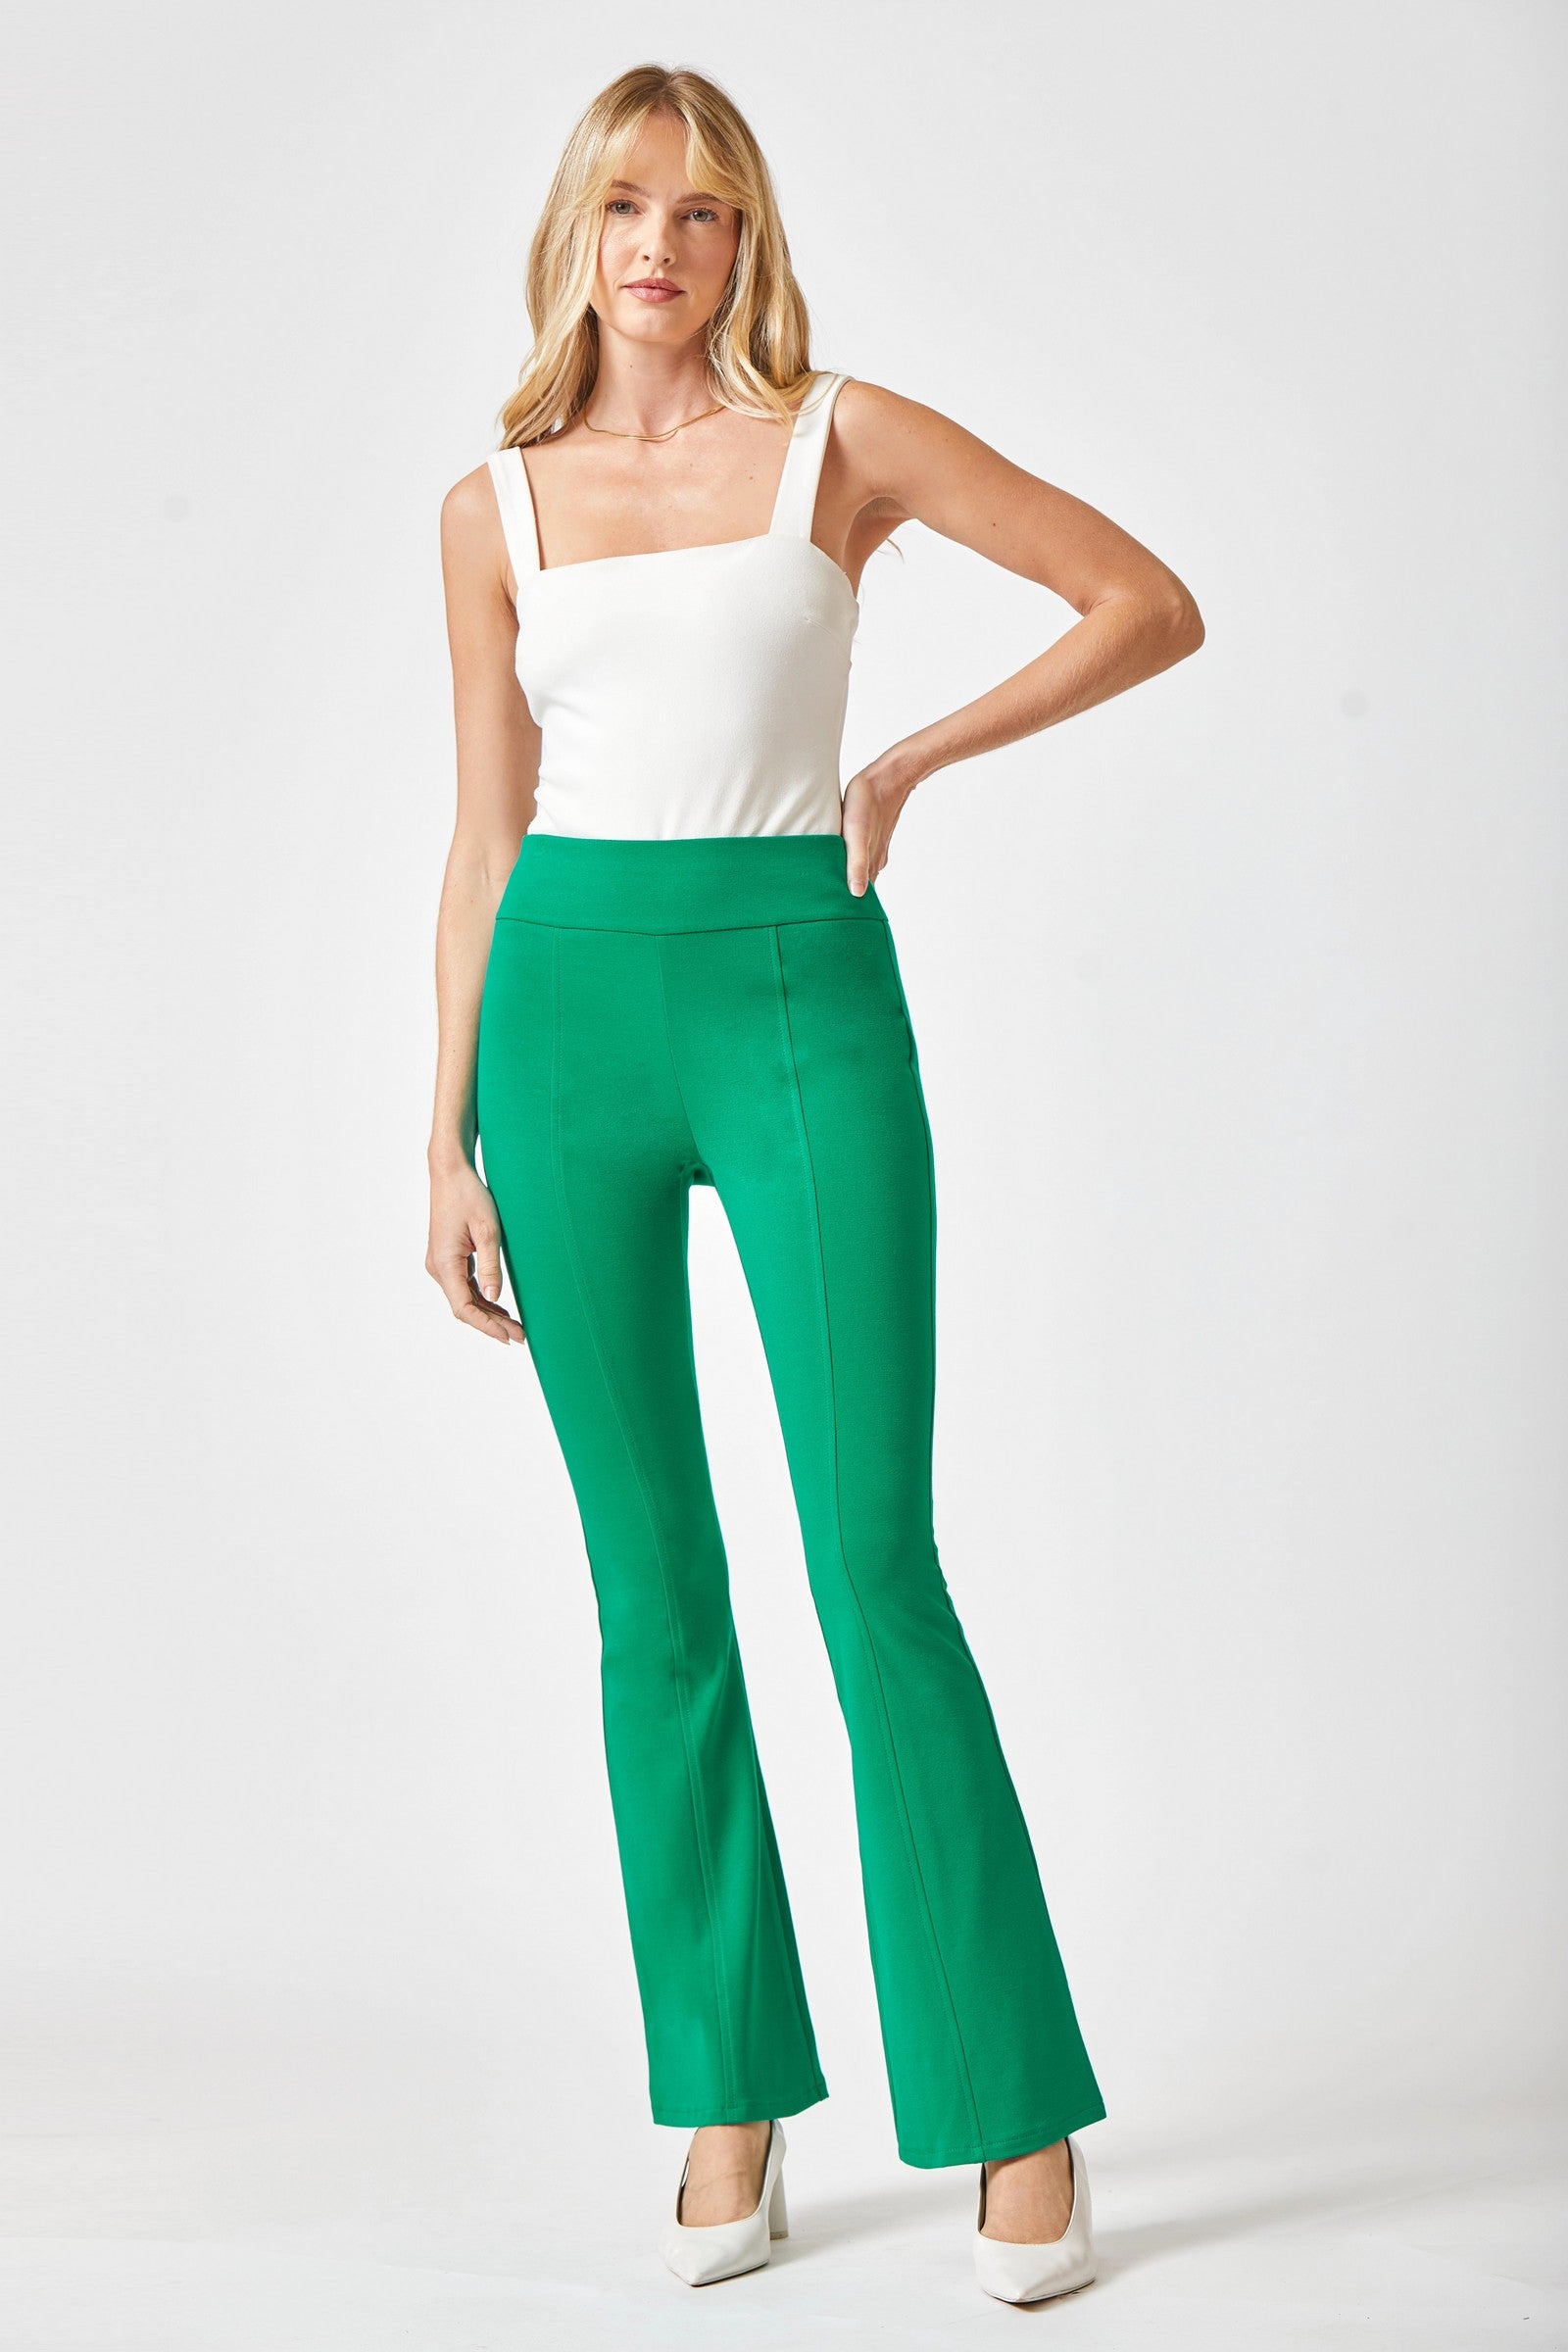 Magic Flare Pants in Eleven Colors - 6/10